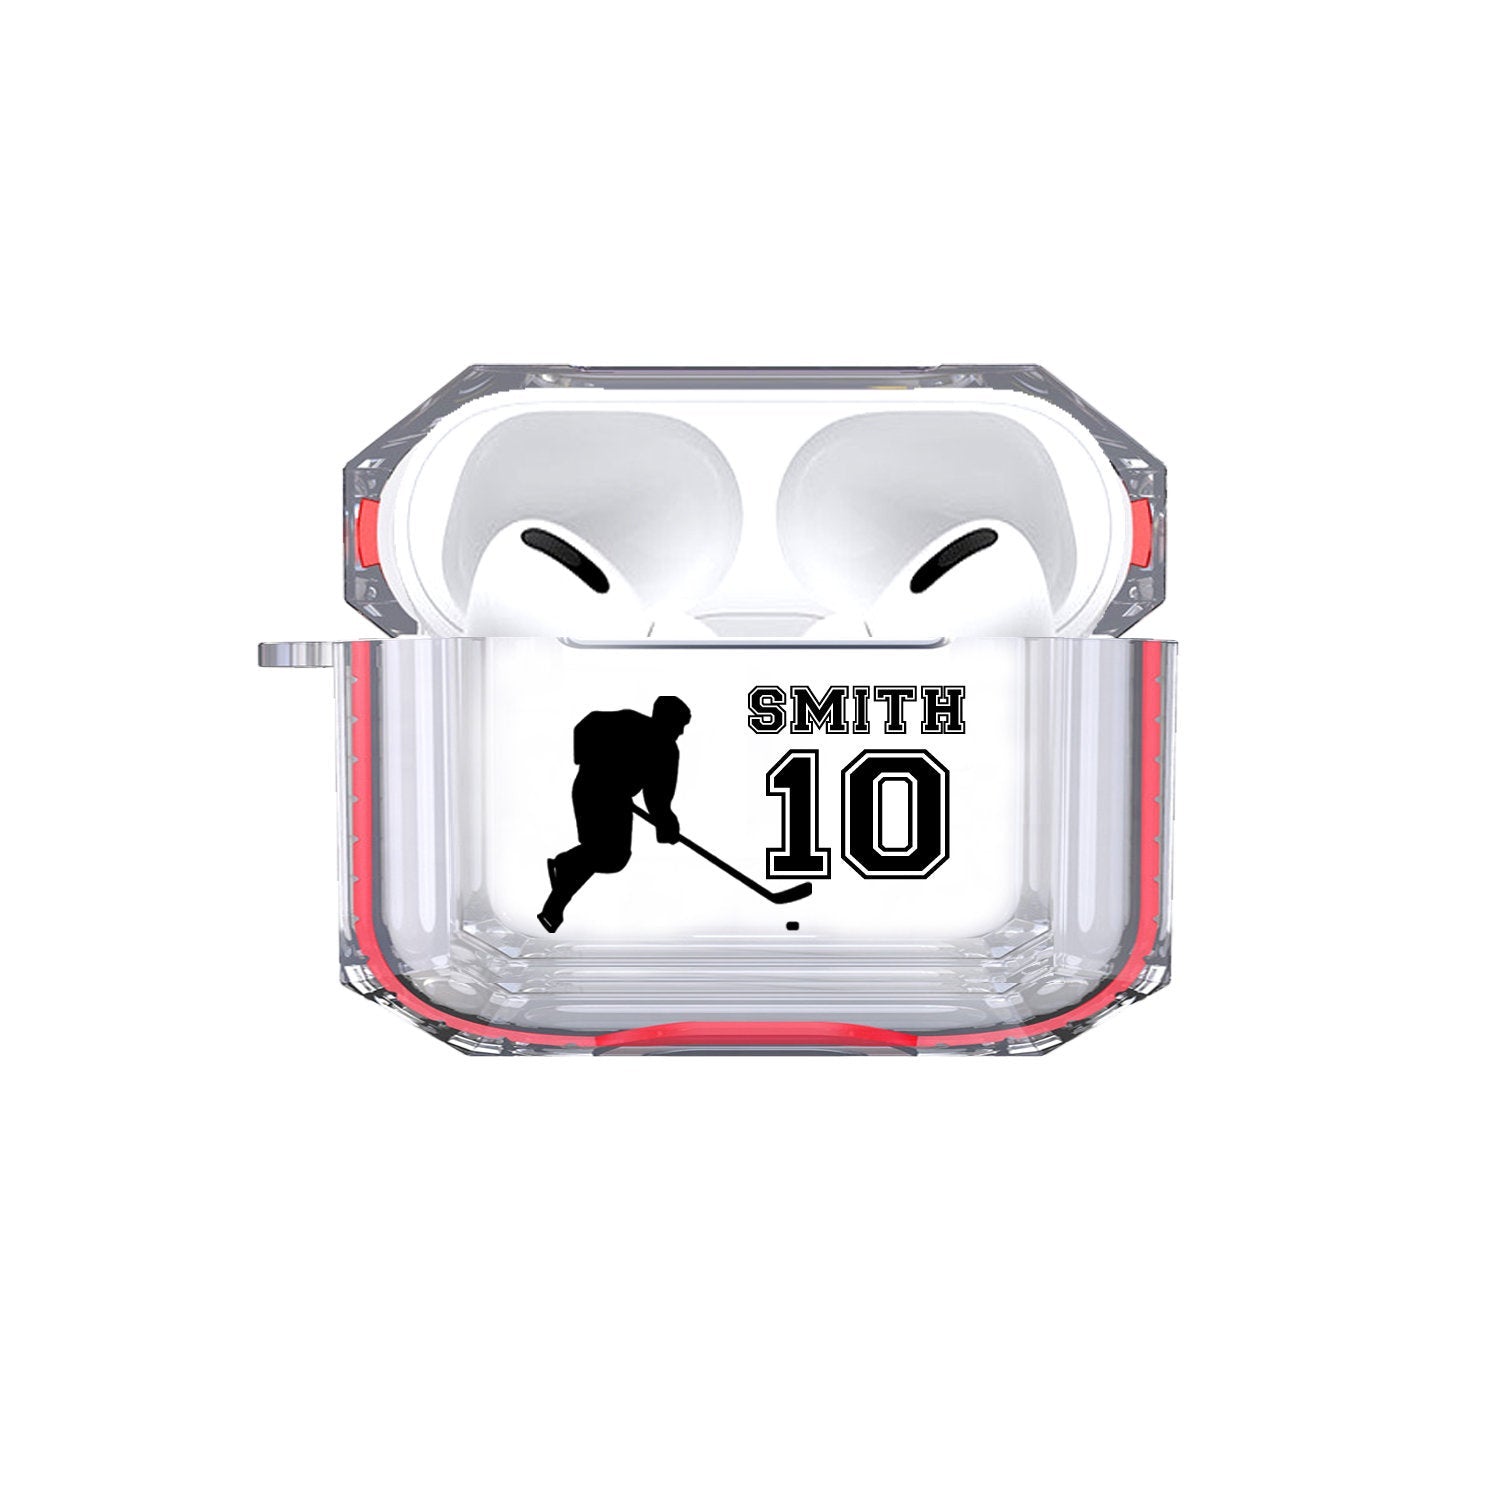 Protective Customized Sports Airpods Pro Case Hockey Name and Number Air pods Pro Case Personalized Gift for Hockey Player Coach Mom Dad Fan